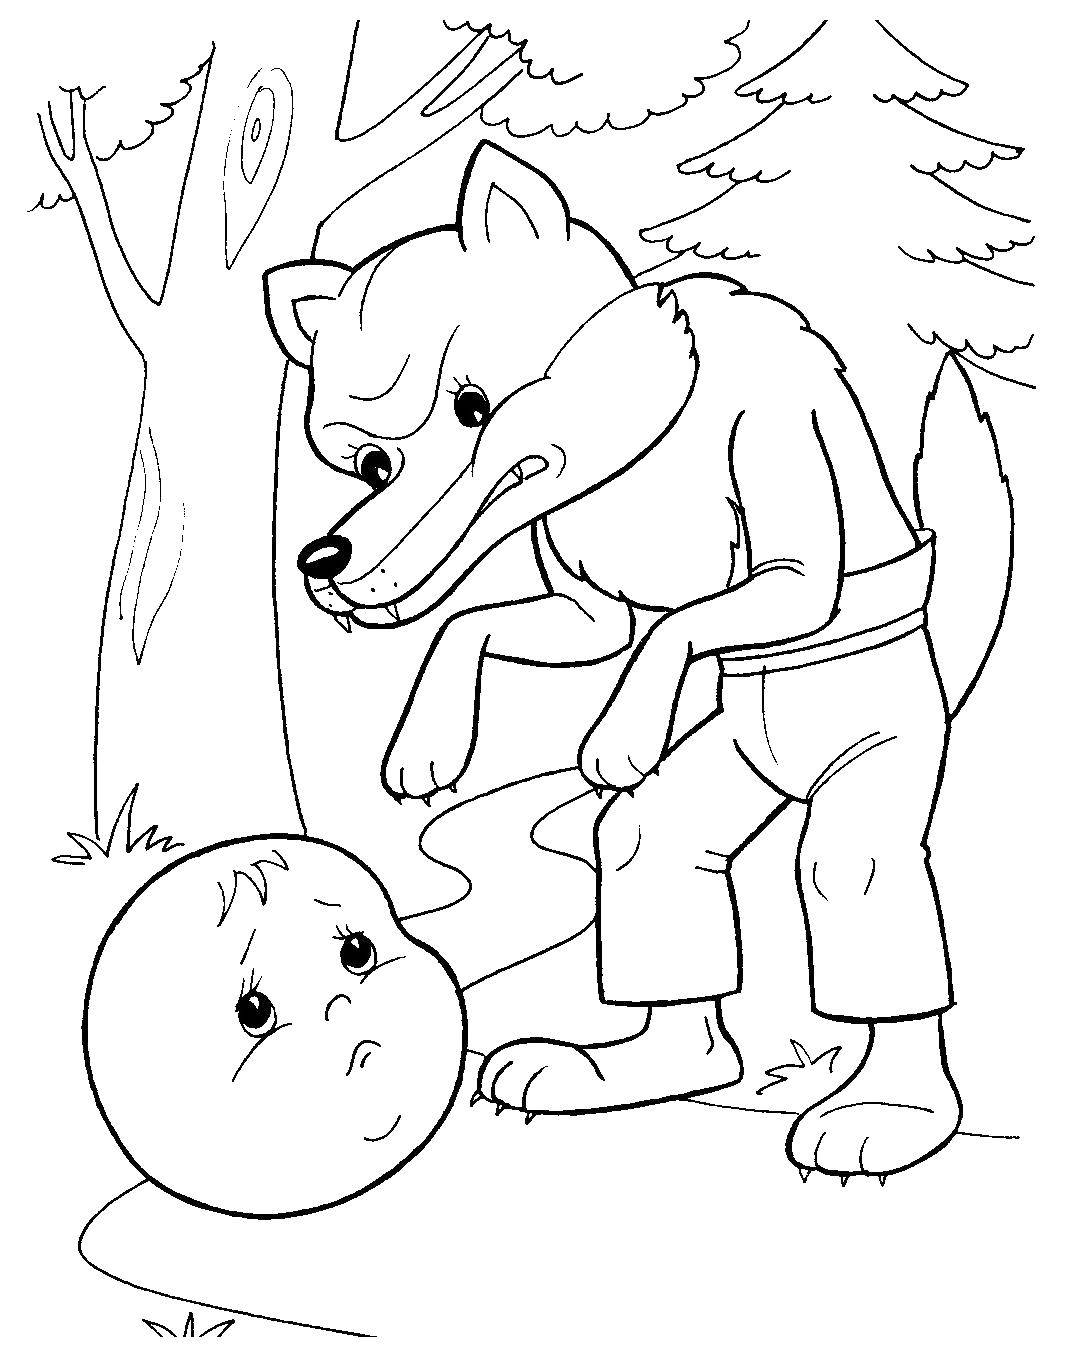 Coloring Scared wolf the gingerbread man. Category gingerbread man . Tags:  Fairy Tales, Gingerbread Man.